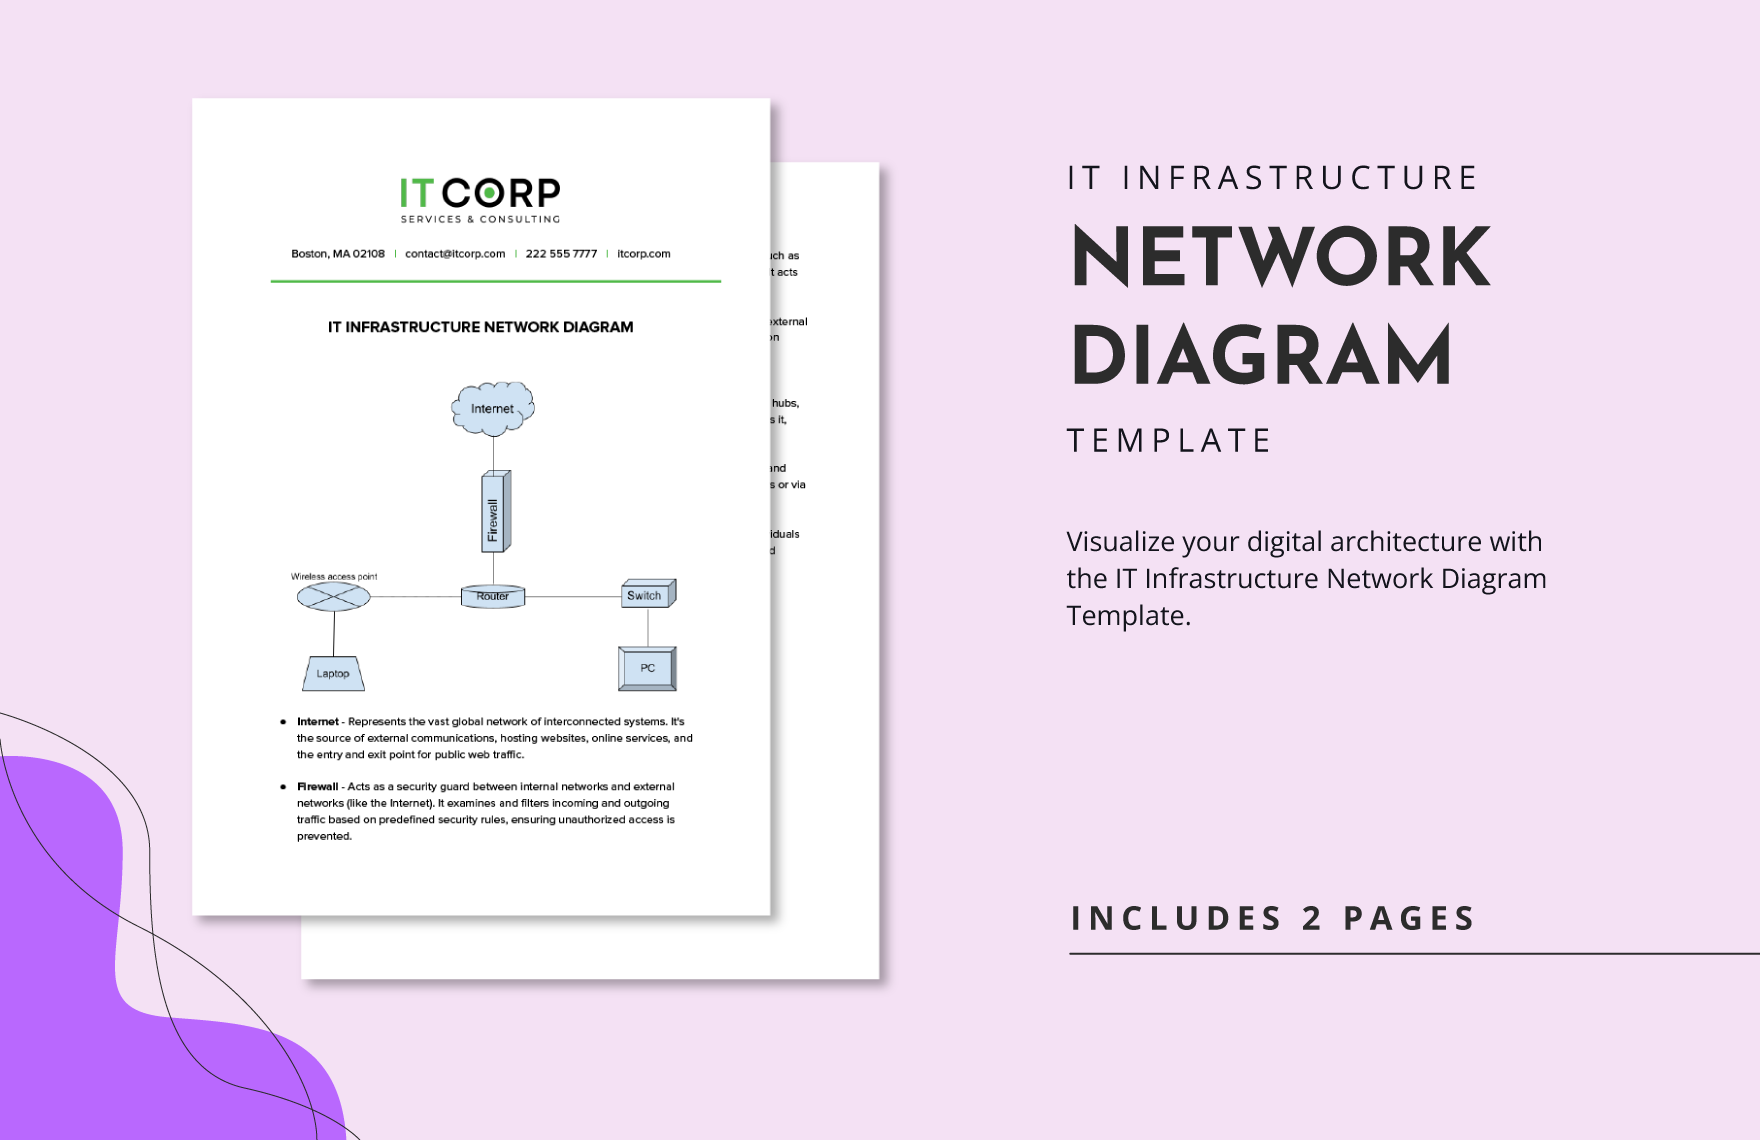 IT Infrastructure Network Diagram Template